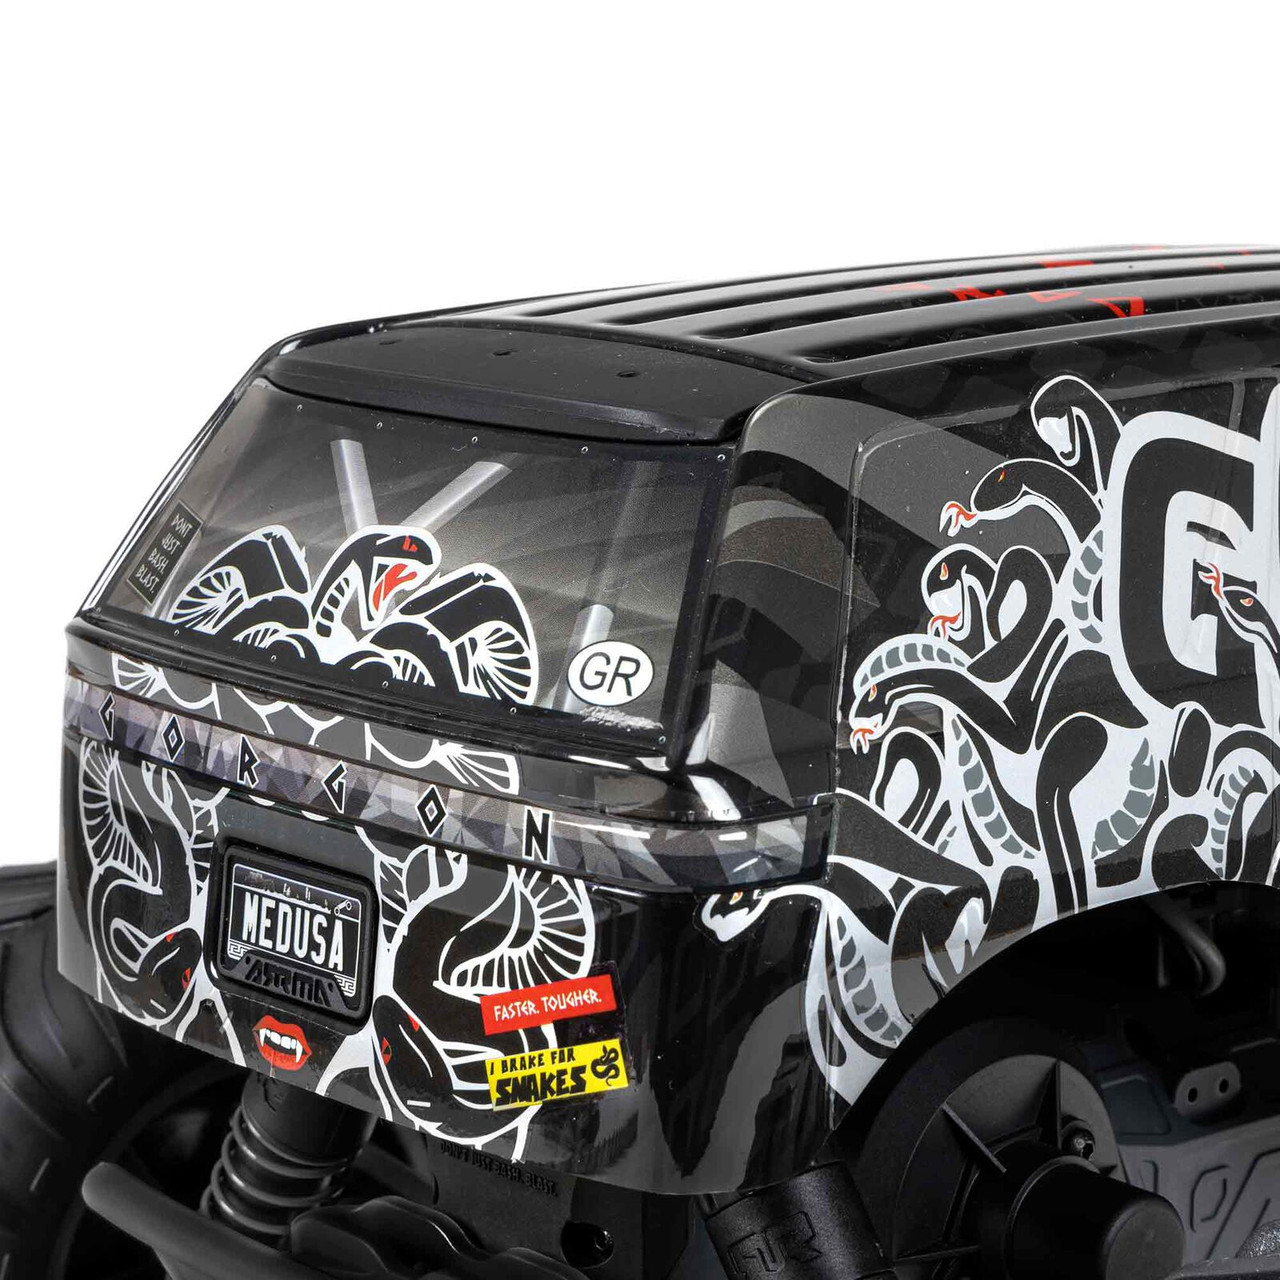 Arrma 1/10 GORGON 4X2 MEGA 550 Brushed Monster Truck Ready-To-Assemble Kit with Battery & Charger